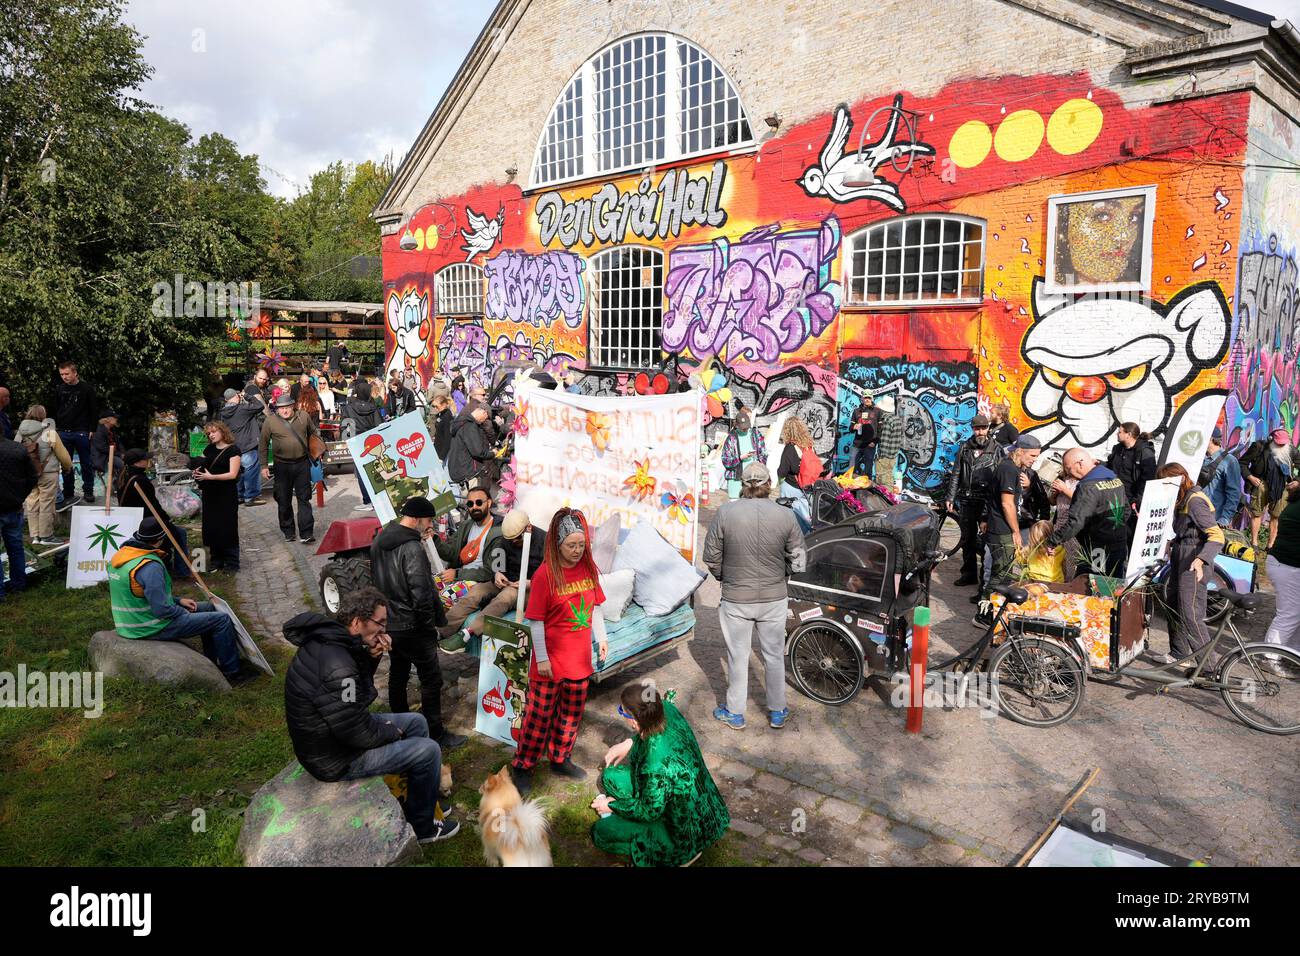 Demonstration for the legalization of cannabis in Copenhagen, Saturday 30 September 2023. The demonstration goes from Christiania to Christiansborg Castle Square. Freetown Christiania in Copenhagen is known for its cannabis-friendly culture and free-spirited residents. Christiania is considered to be the fourth largest tourist attraction in Copenhagen, with half a million visitors annually. (Photo: Emil Helms/Scanpix 2023) Stock Photo